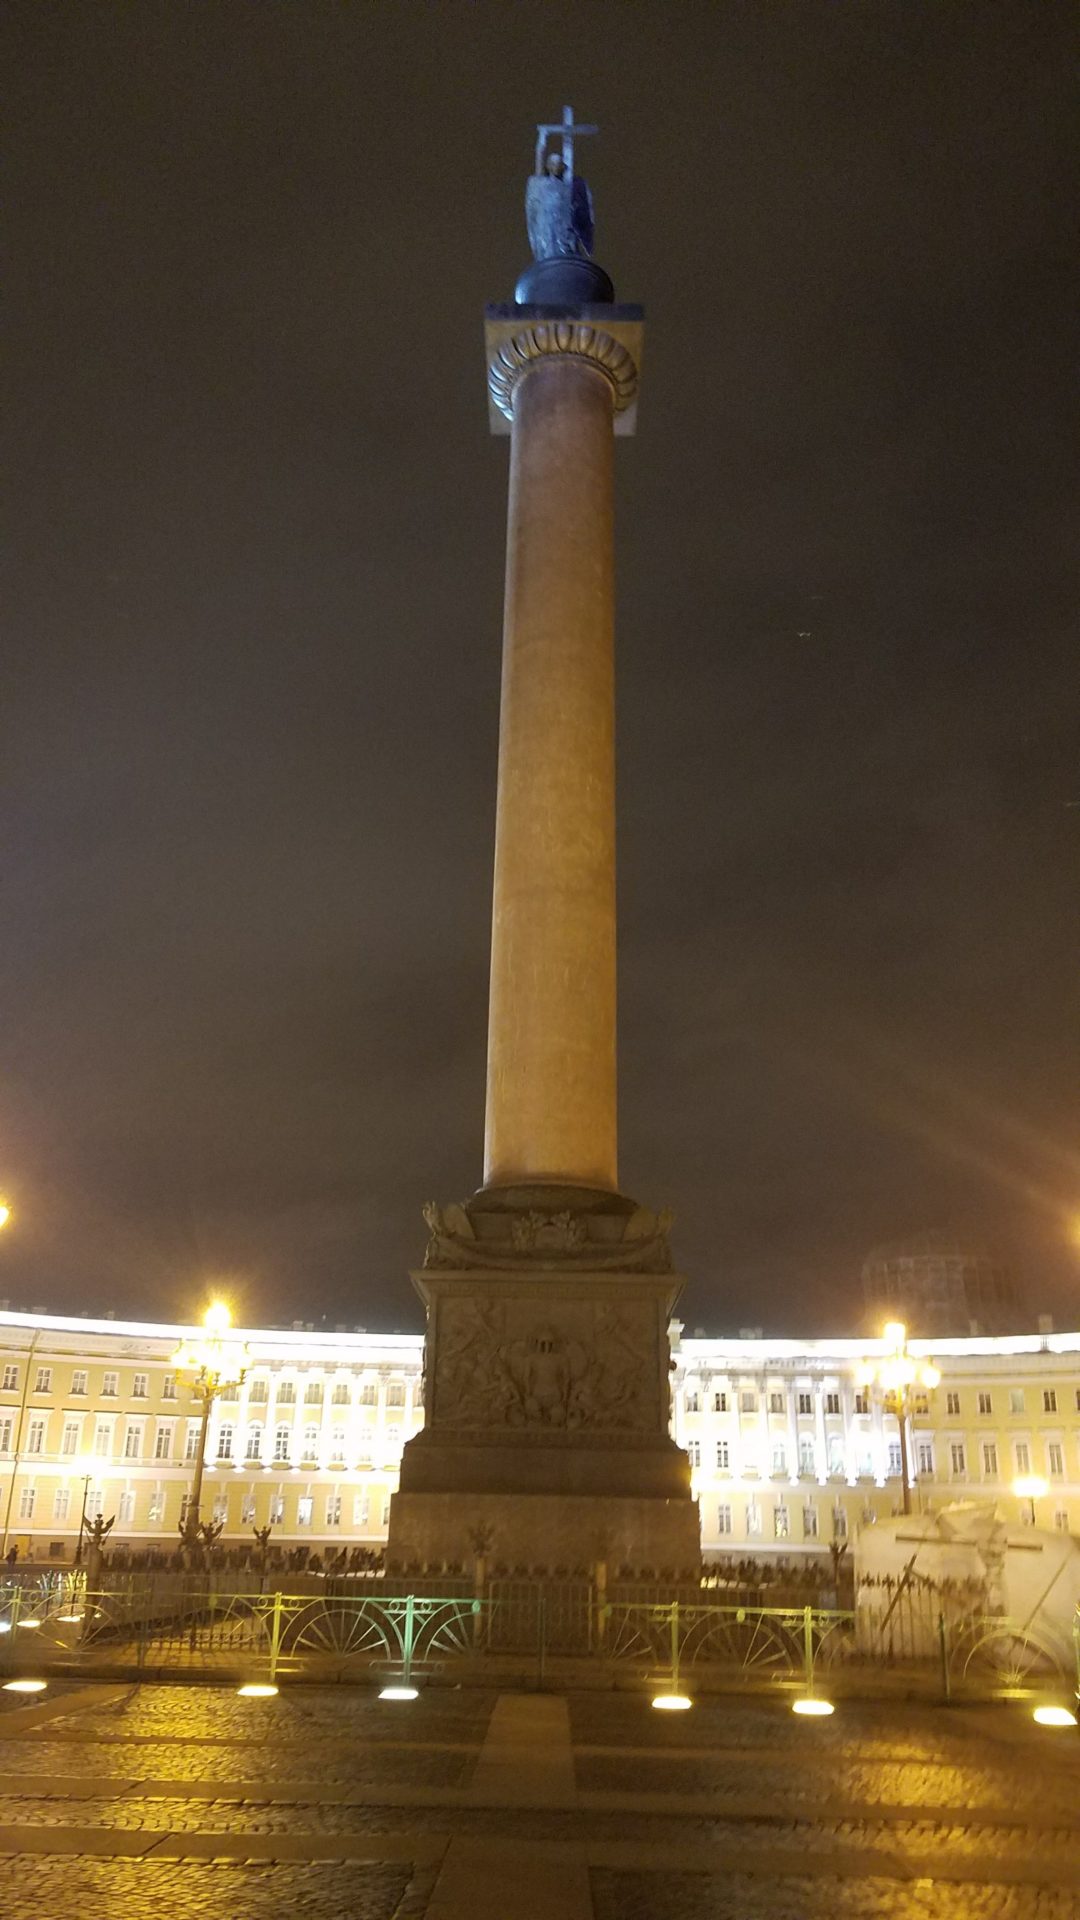 a tall pillar with a statue in front of a building